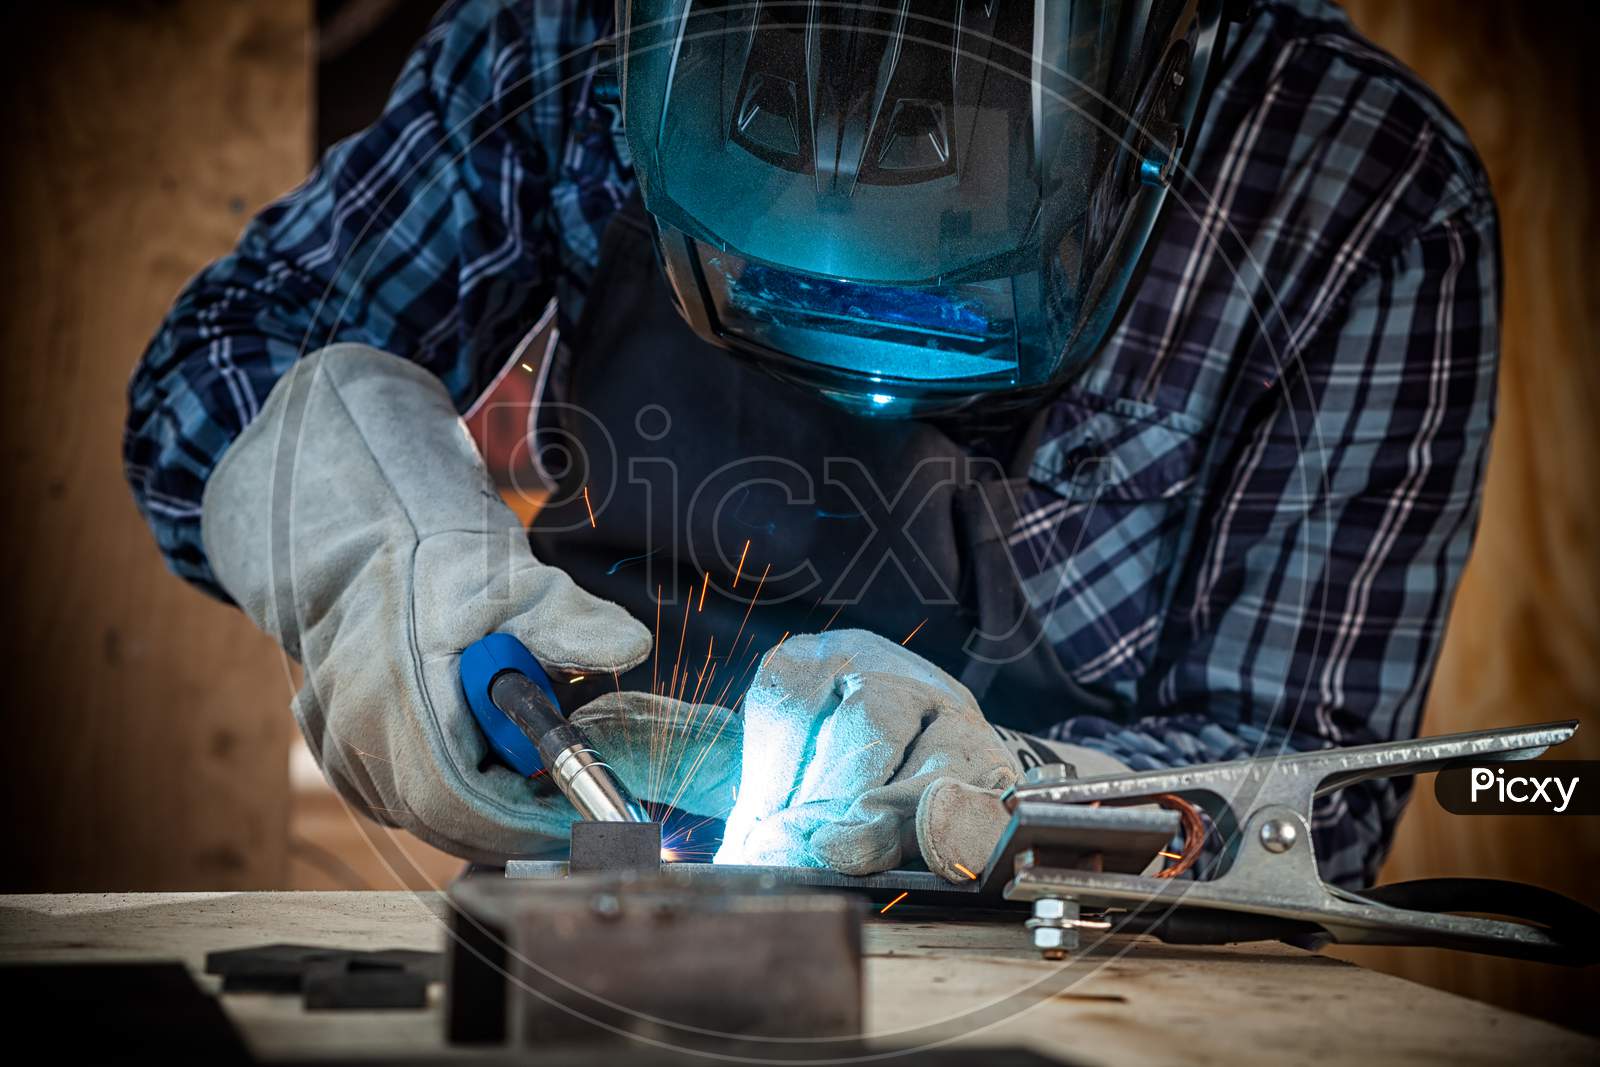 Close Up Of A Young  Man Welder In  Uniform, Welding Mask And Welders Leathers, Weld  Metal  With A Arc Welding Machine  In Workshop, Blue And Orange  Sparks Fly To The Sides